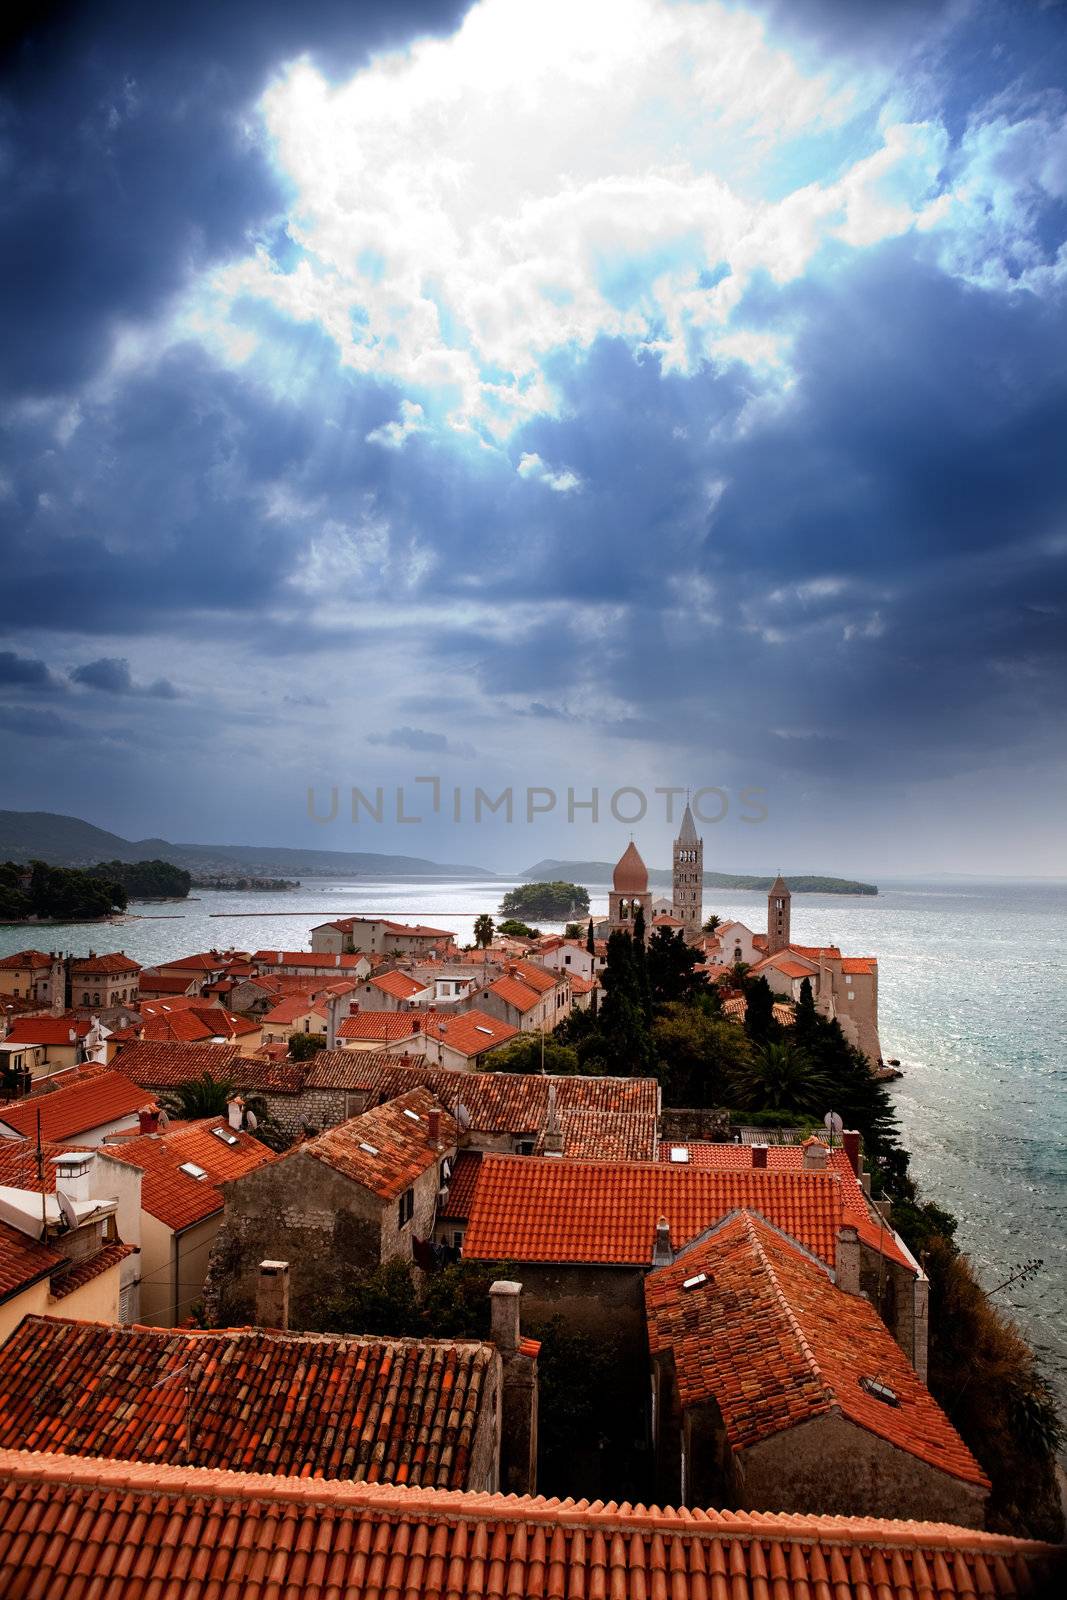 A medieval town with a dramatic storm filled sky